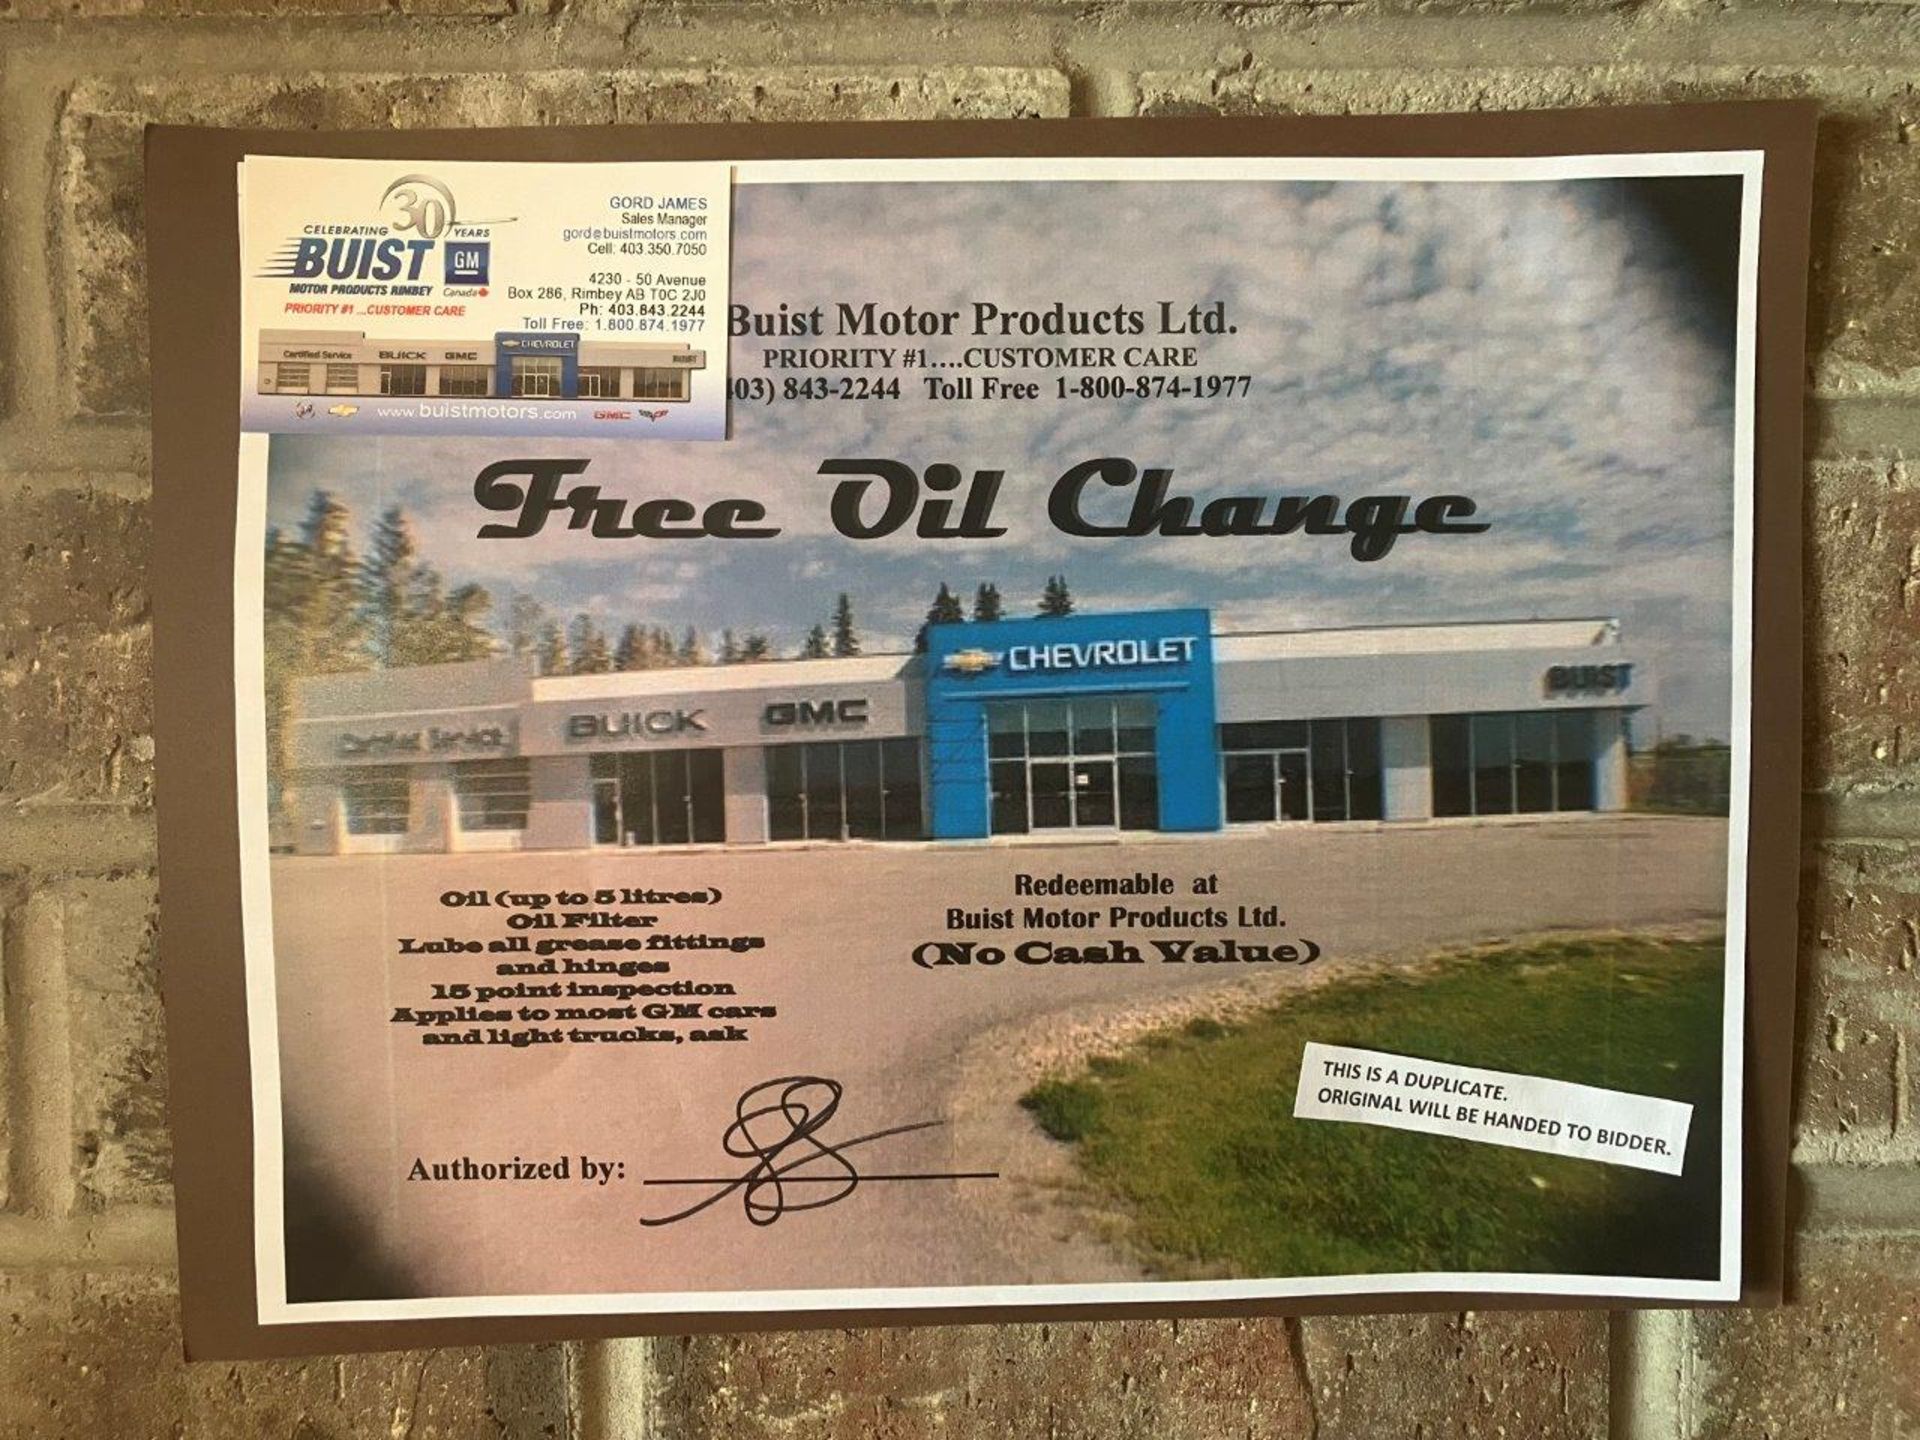 BUIST MOTOR PRODUCTS OIL CHANGE GIFT CERTIFICATE, TRAVEL MUG & BASEBALL CAP - Image 2 of 3